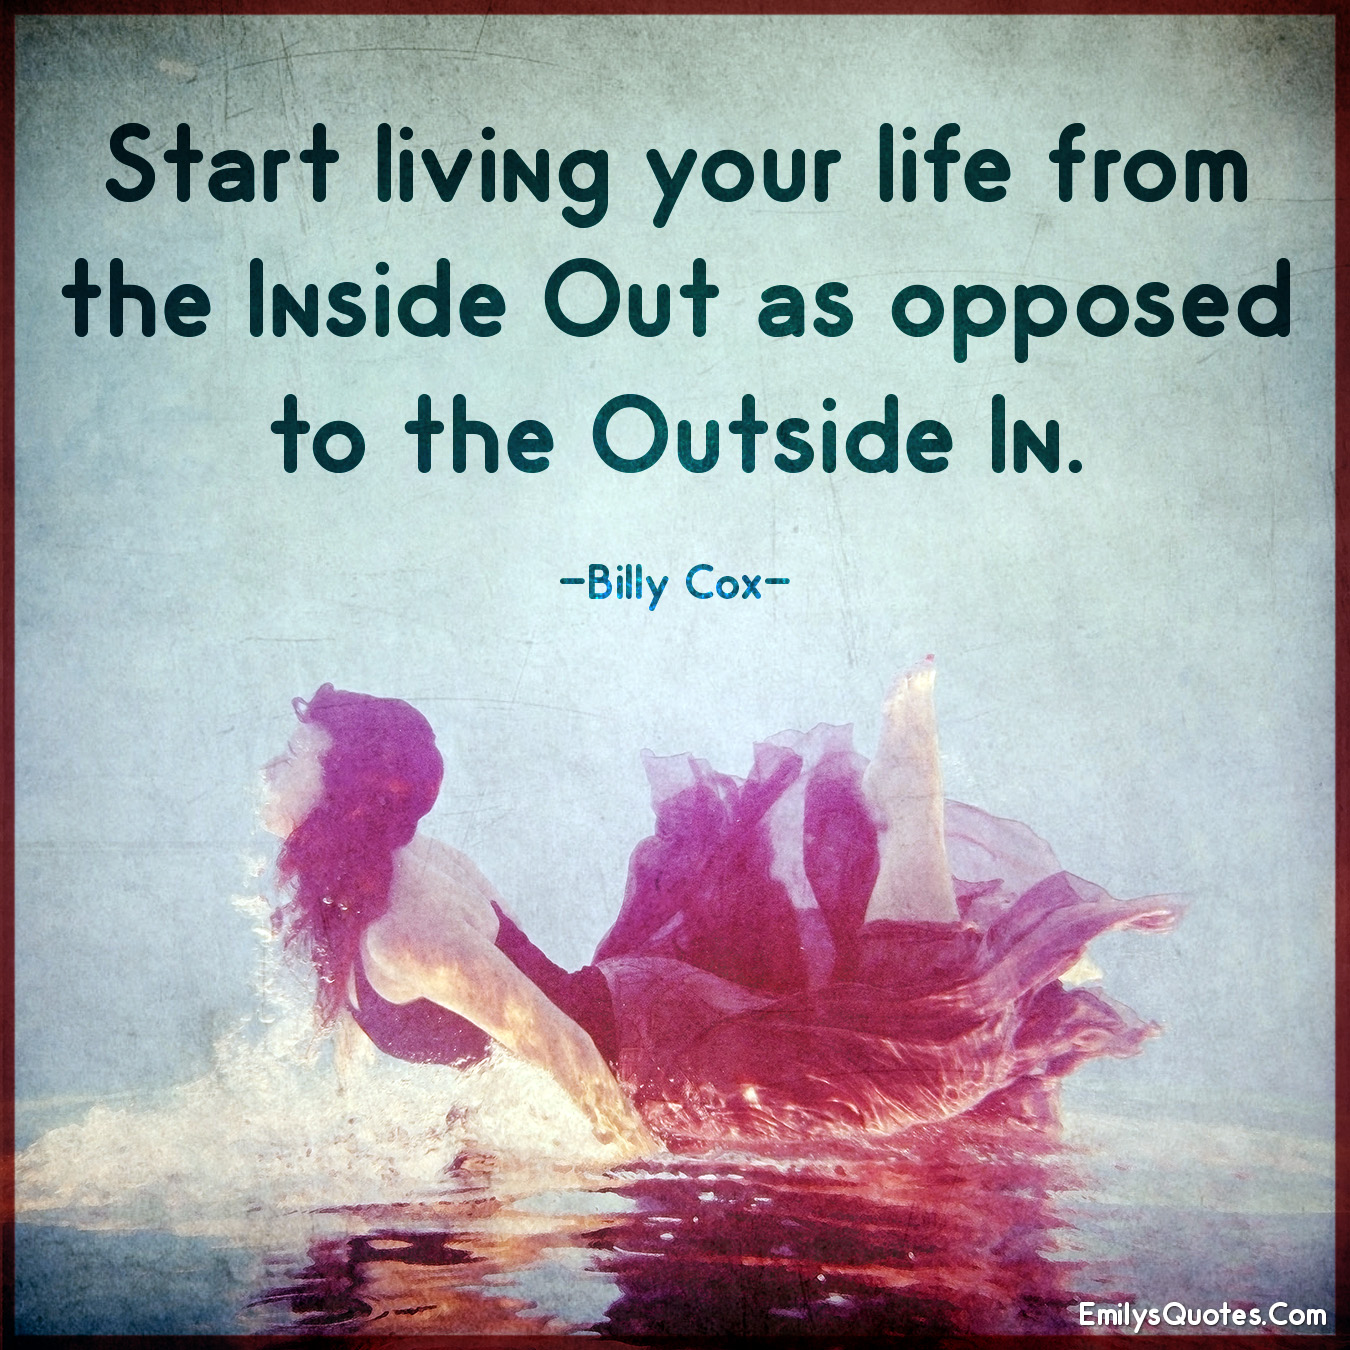 Start living your life from the inside out as opposed to the outside in